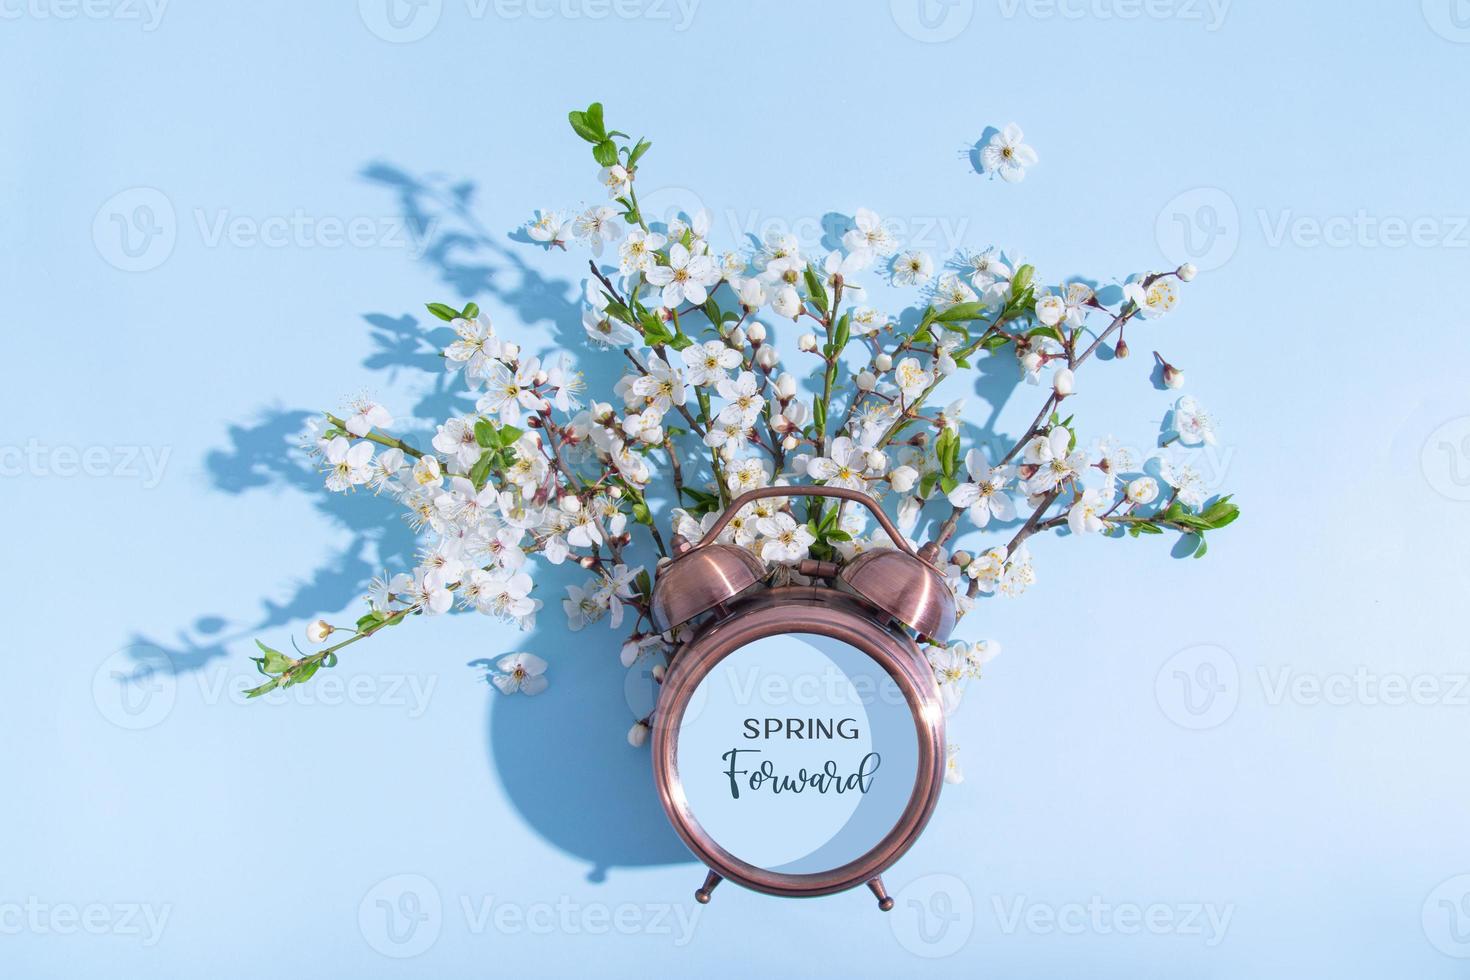 Spring forward text on alarm clock and blossom branches on a blue background. Flat lay, top view composition photo